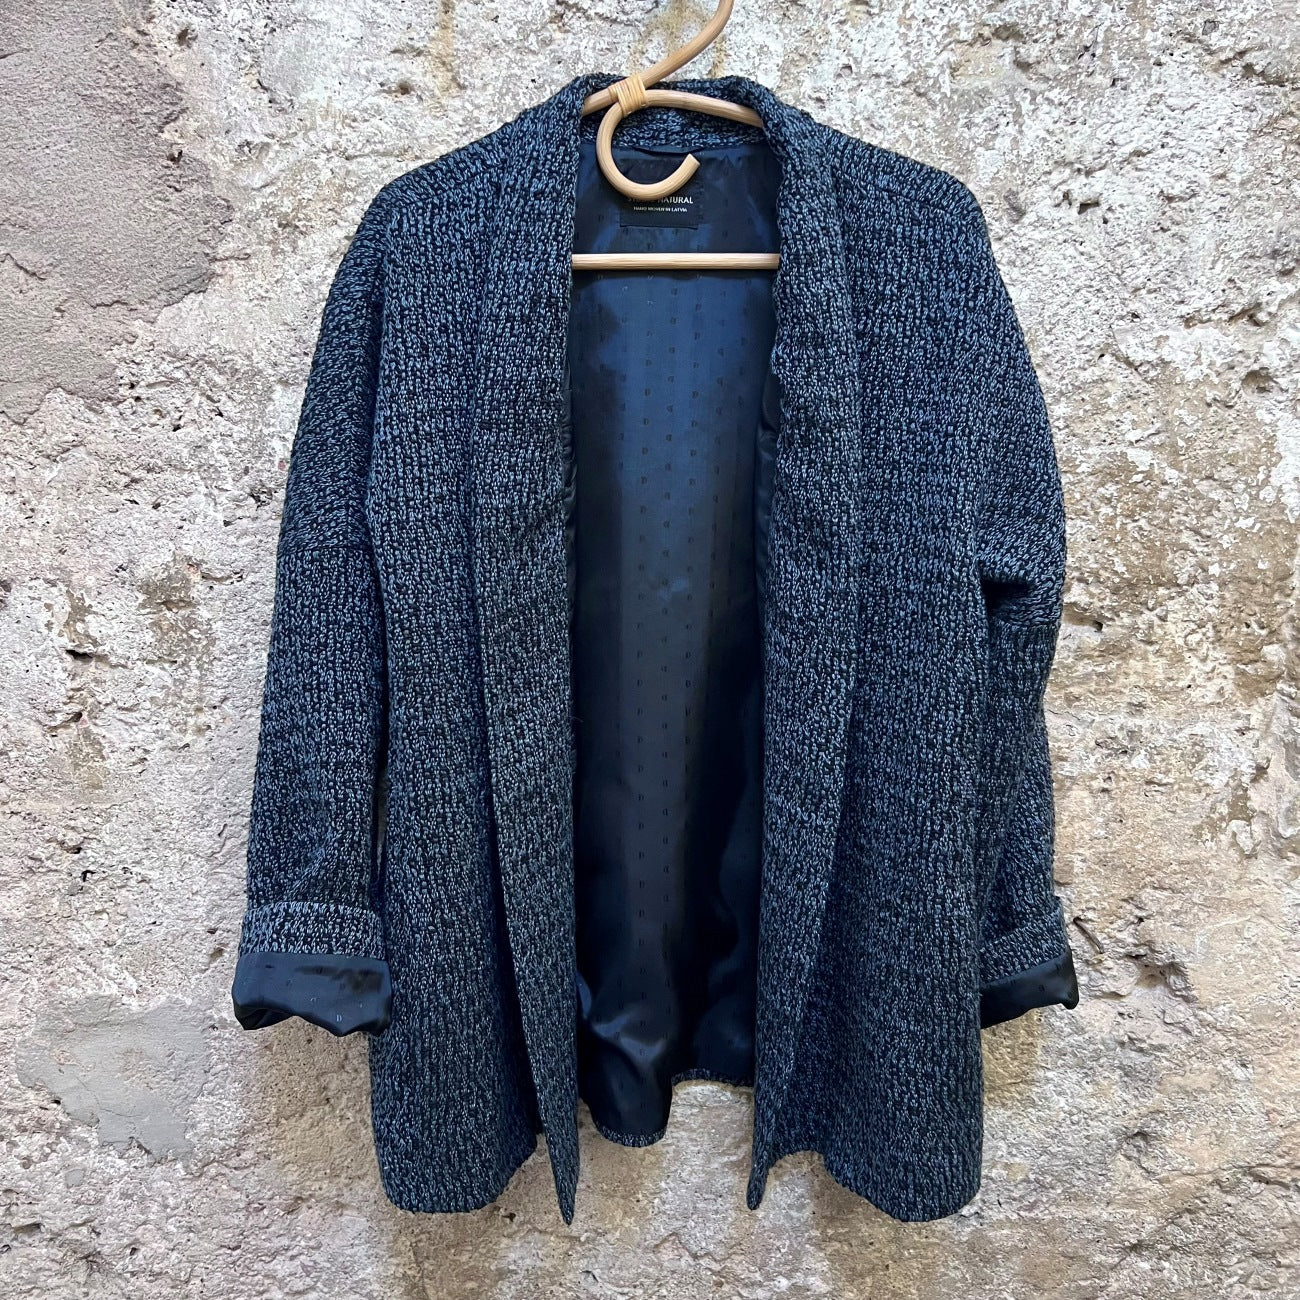 Handcrafted unisex boucle linen jacket in navy in L size